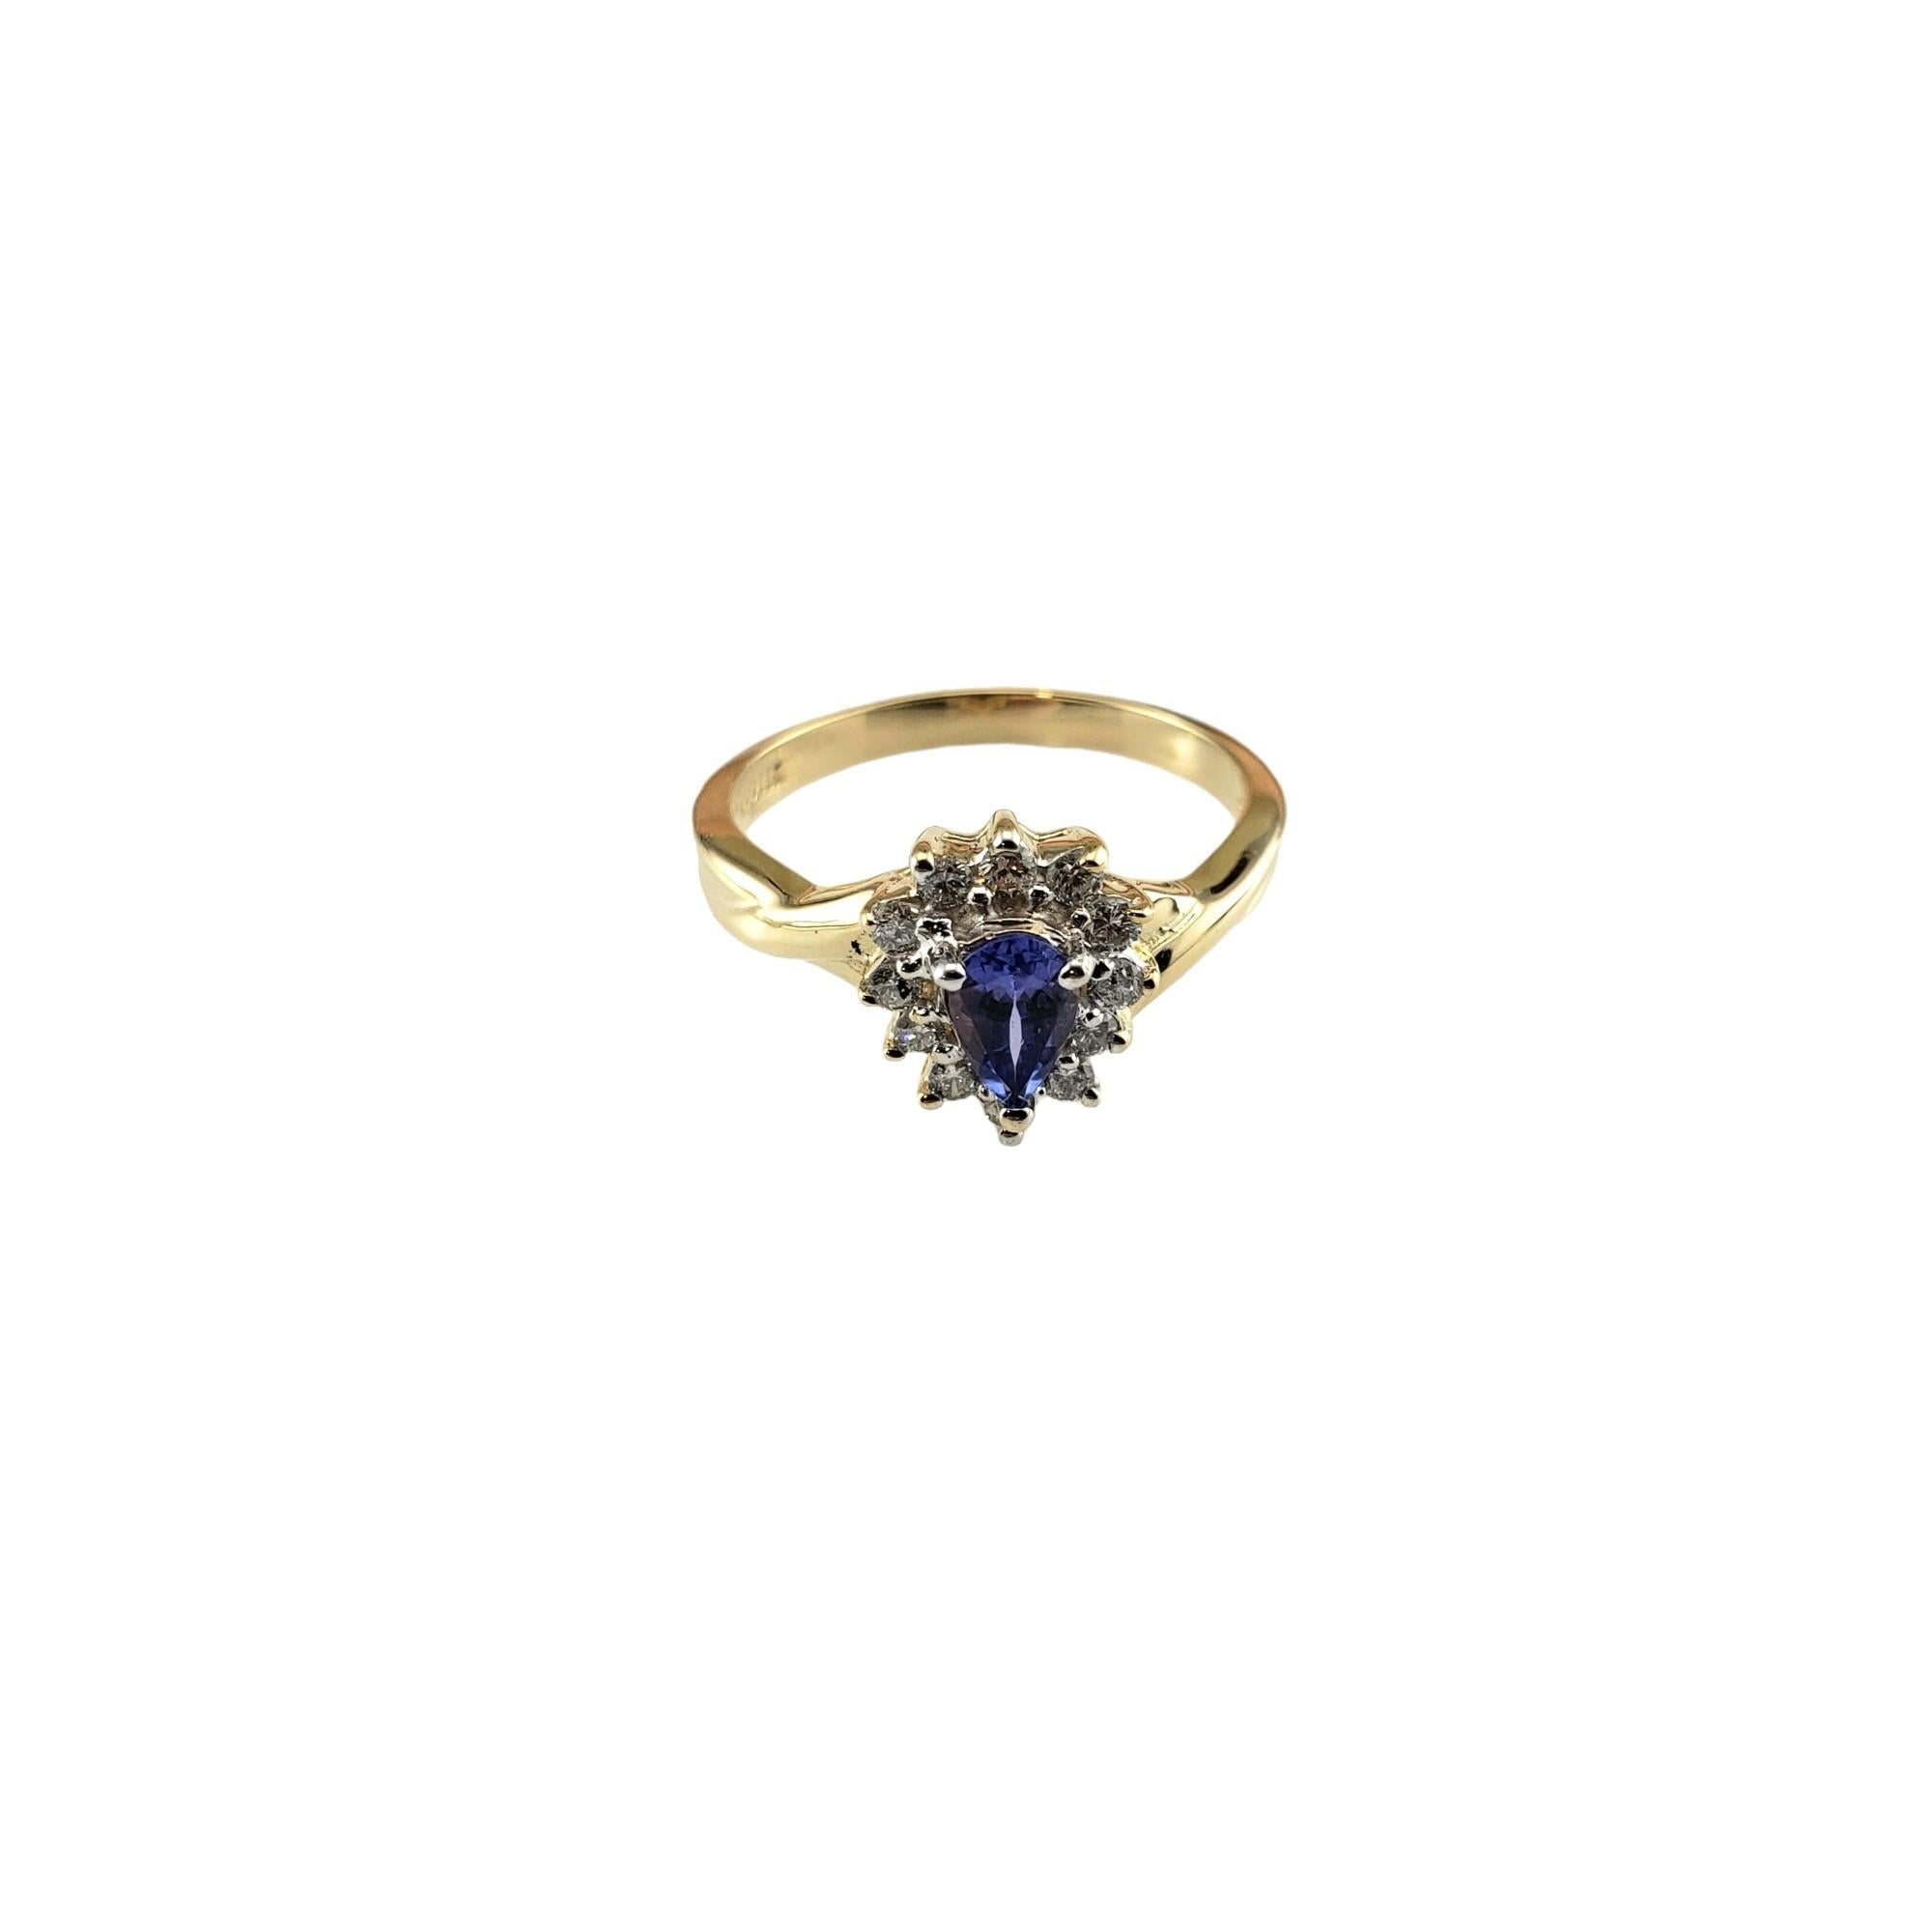 Vintage 14K Yellow Gold Tanzanite and Diamond Ring Size 6.25 

This stunning ring features one pear shaped tanzanite stone (5.8 mm x 3.6 mm) surrounded by 12 round brilliant cut diamonds set in classic 14K yellow gold.  Width: 10 mm.  Shank: 2